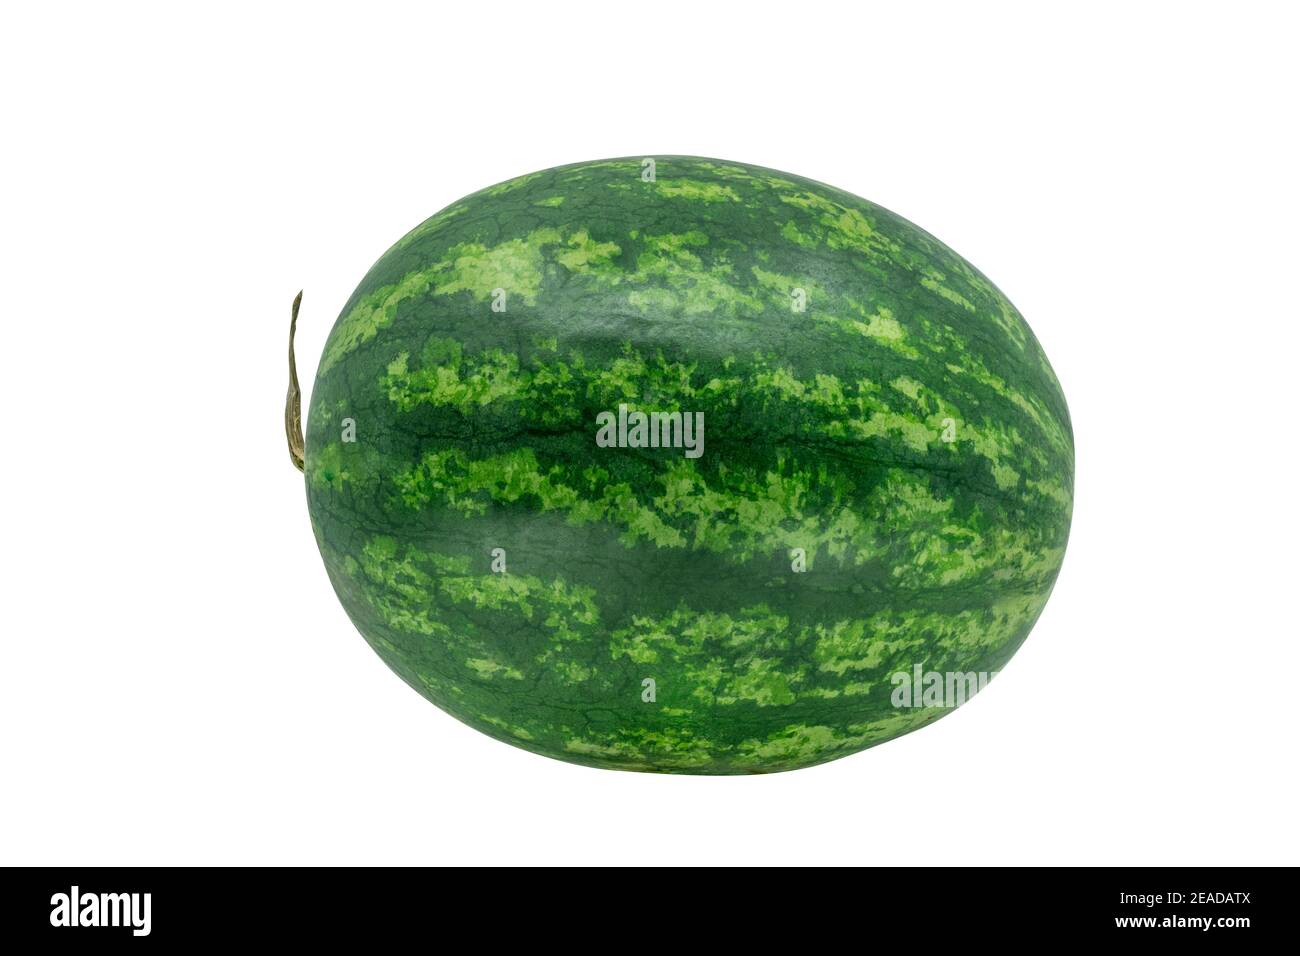 Isolated watermelon on white background with clipping path, whole watermelon image on white background. Stock Photo